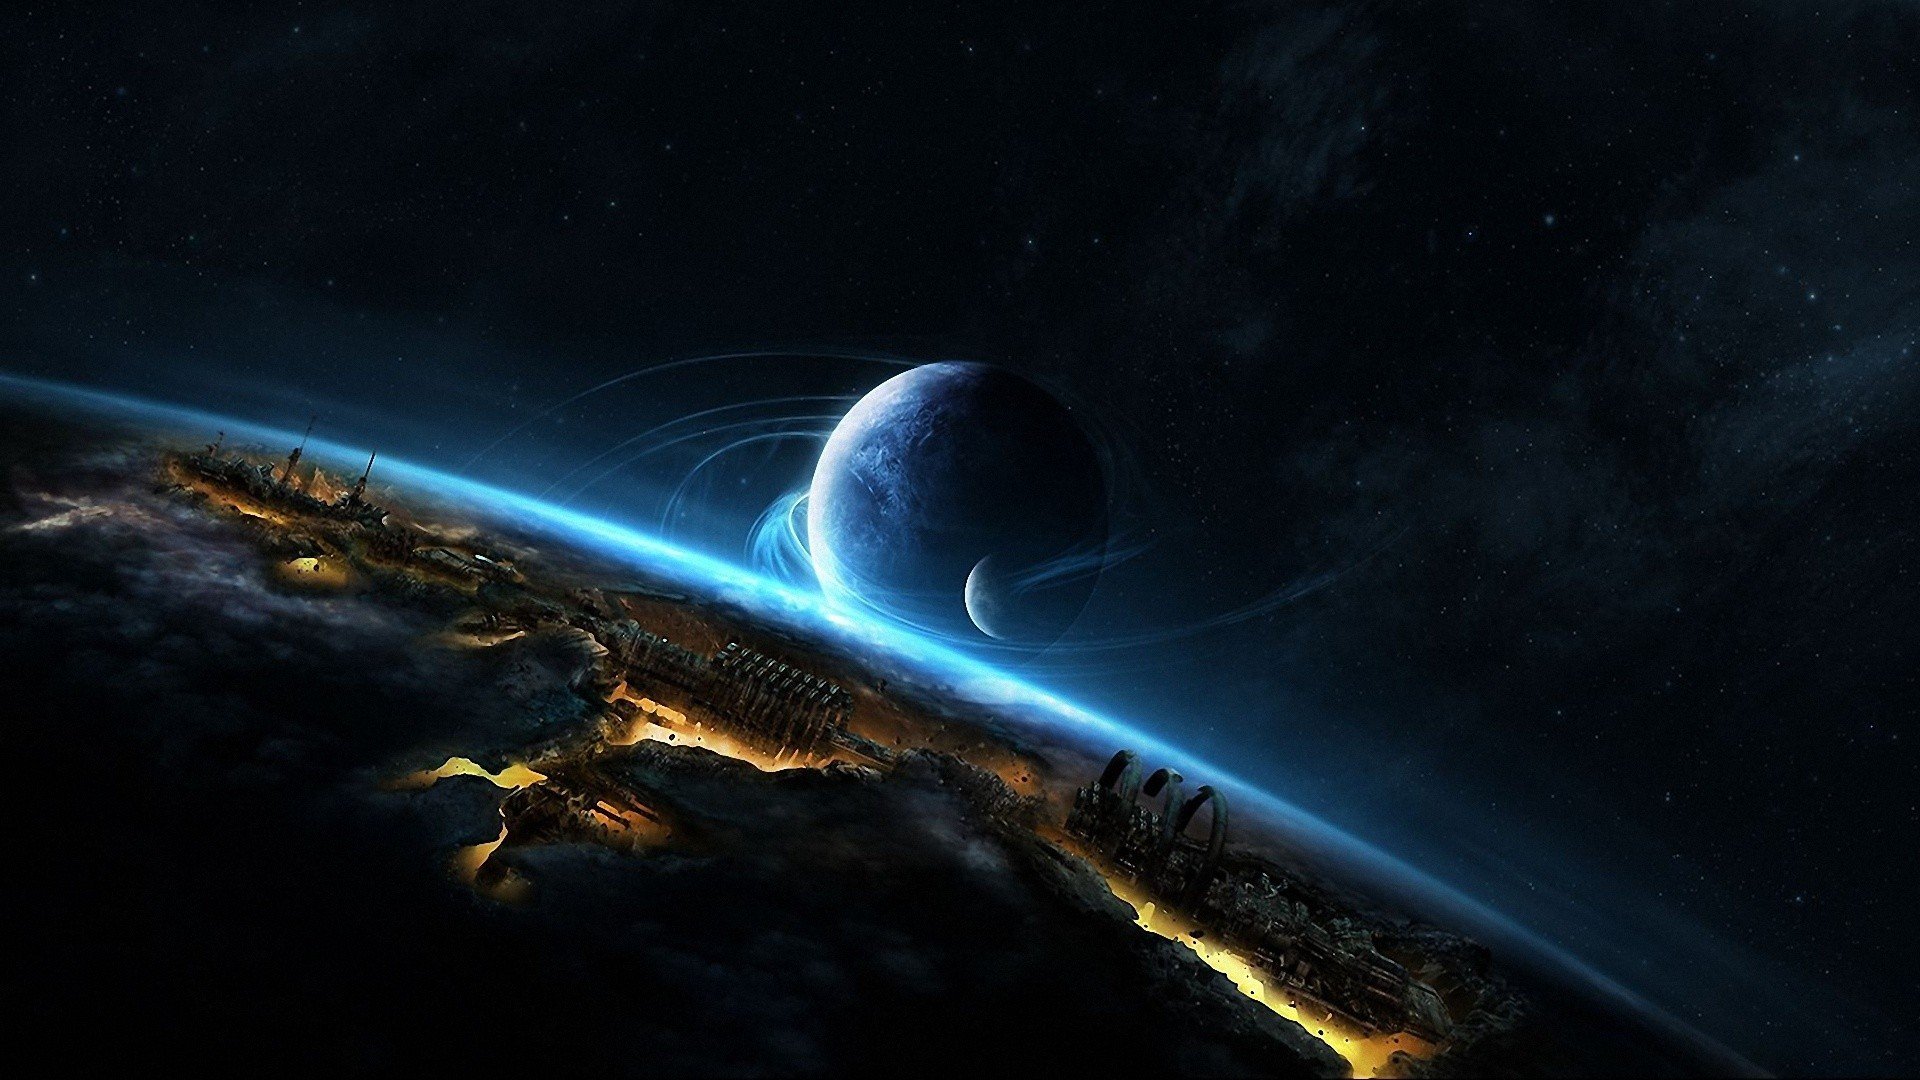 Outer Space Science Fiction Wallpaper